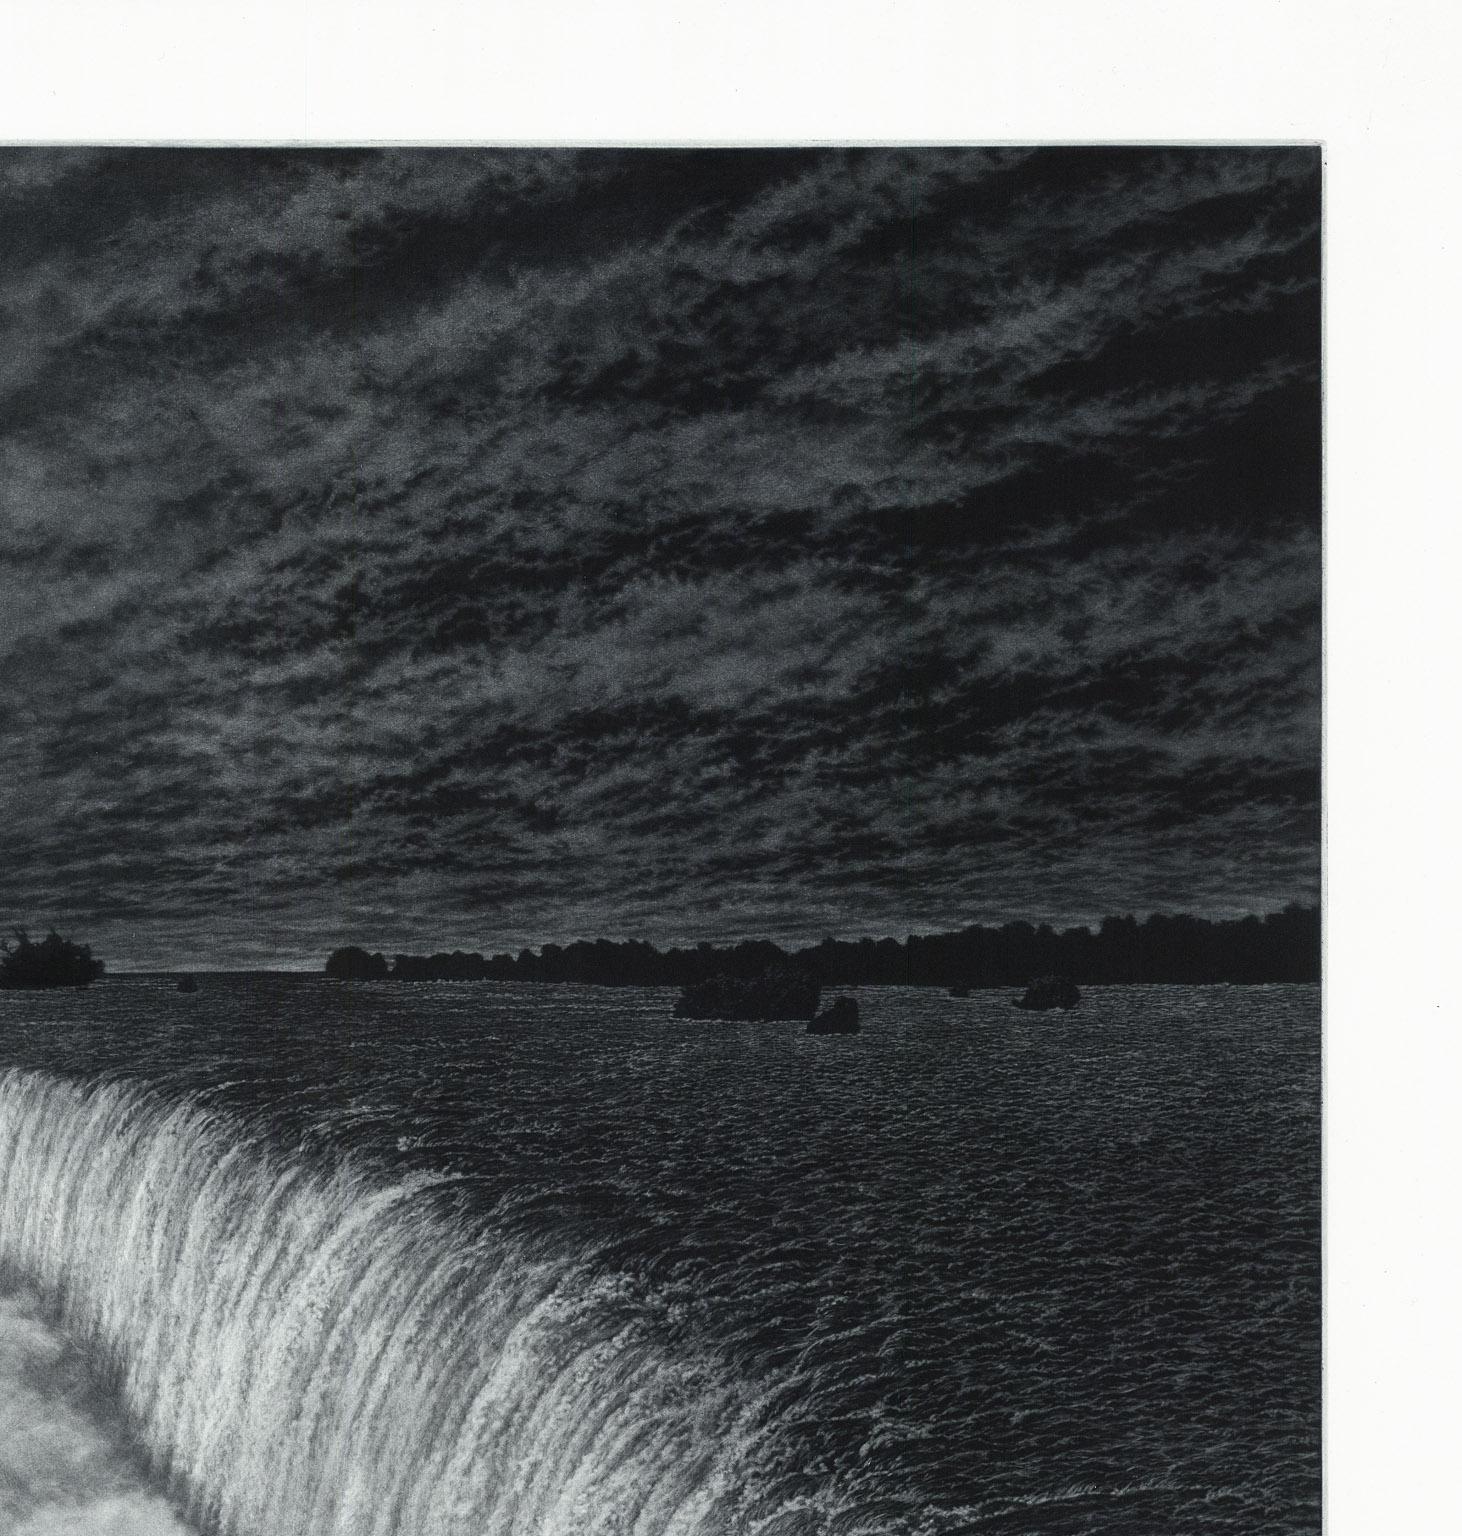 NIAGARA

Contemporary artist Frederick Mershimer created the mezzotint engraving entitled “Niagara” in 2021.  This impression is signed, titled, dated, and inscribed “5/45”- the 5th impression of an edition of 45.  The printed image size is 37.88 x